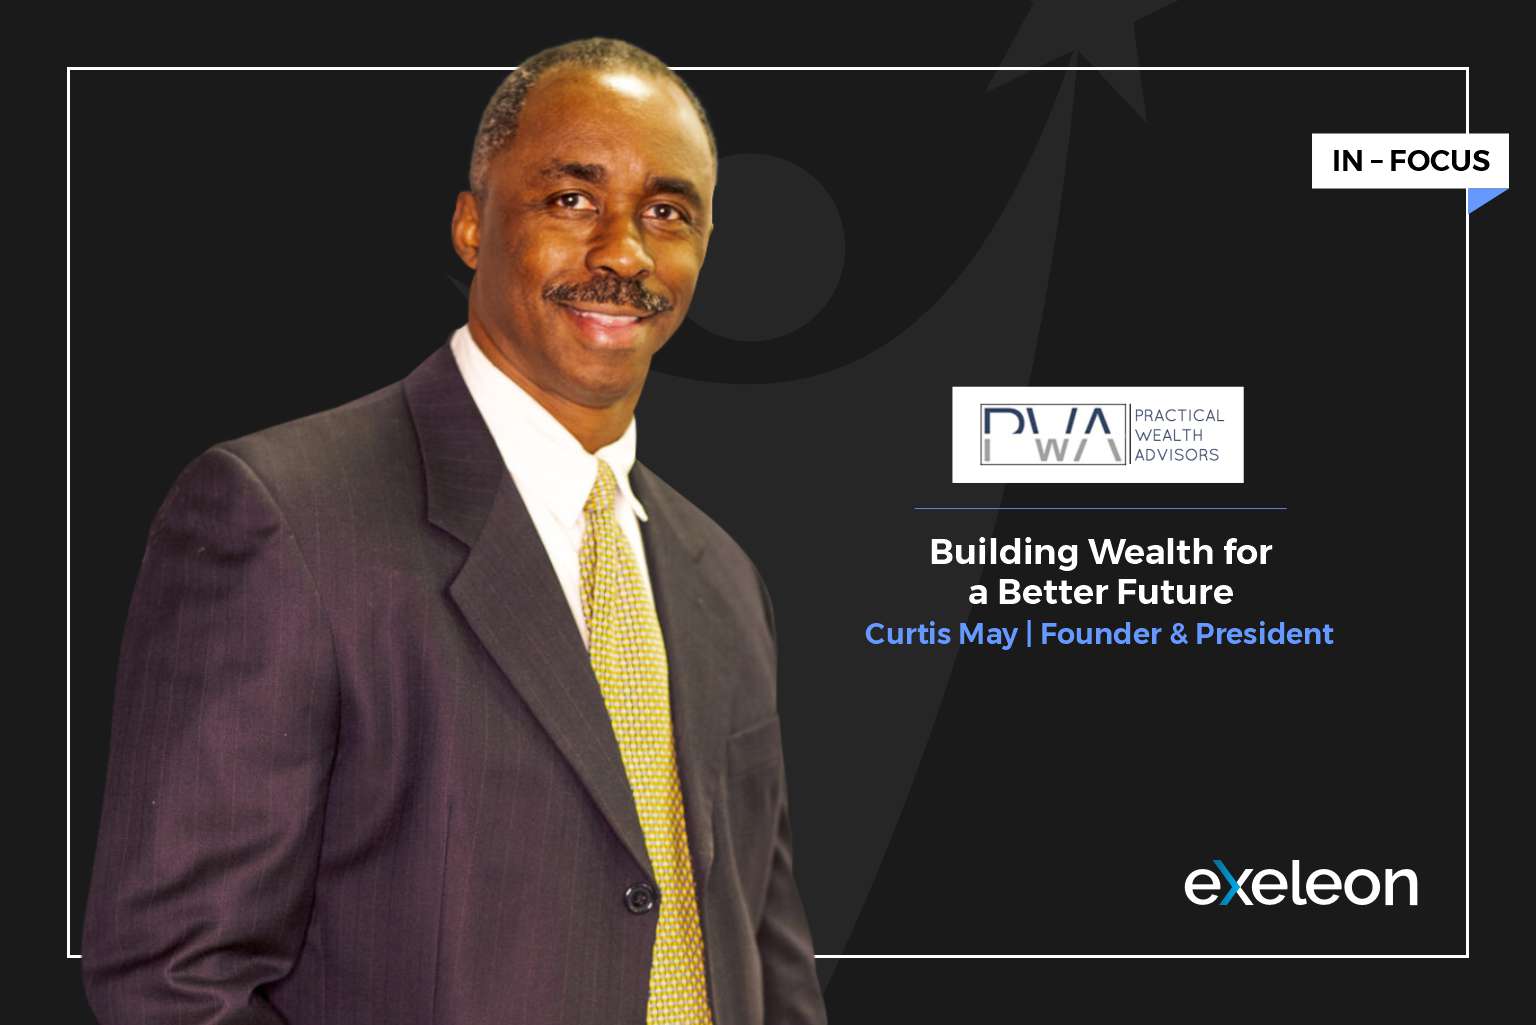 Curtis May Founder and President of Practical Wealth Advisors